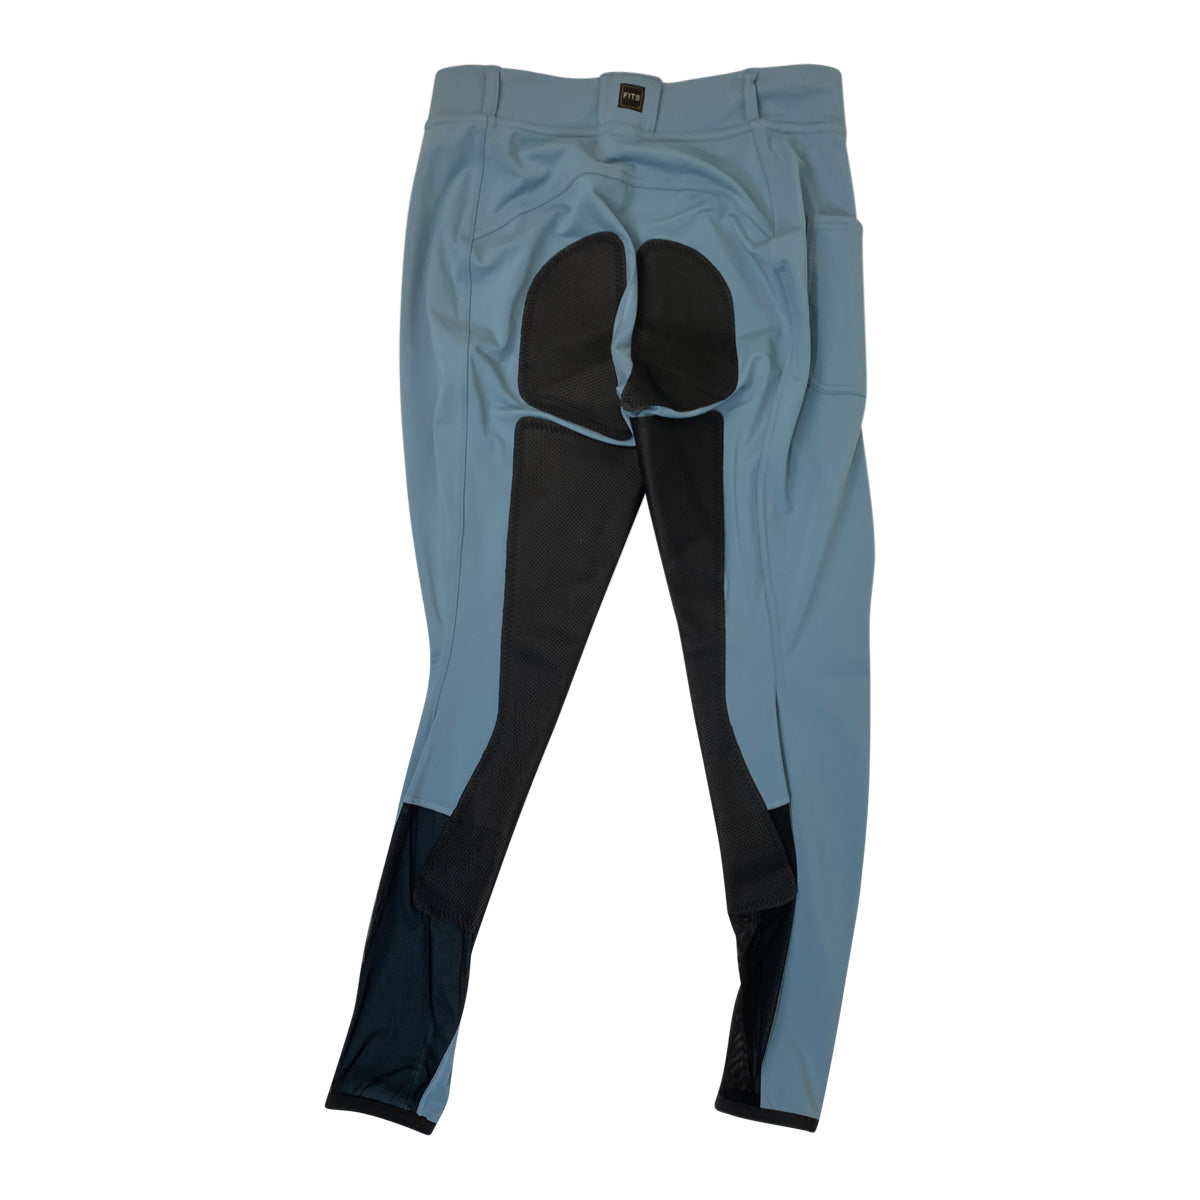 FITS 'PerforMAX'  Pull On Breeches in Storm